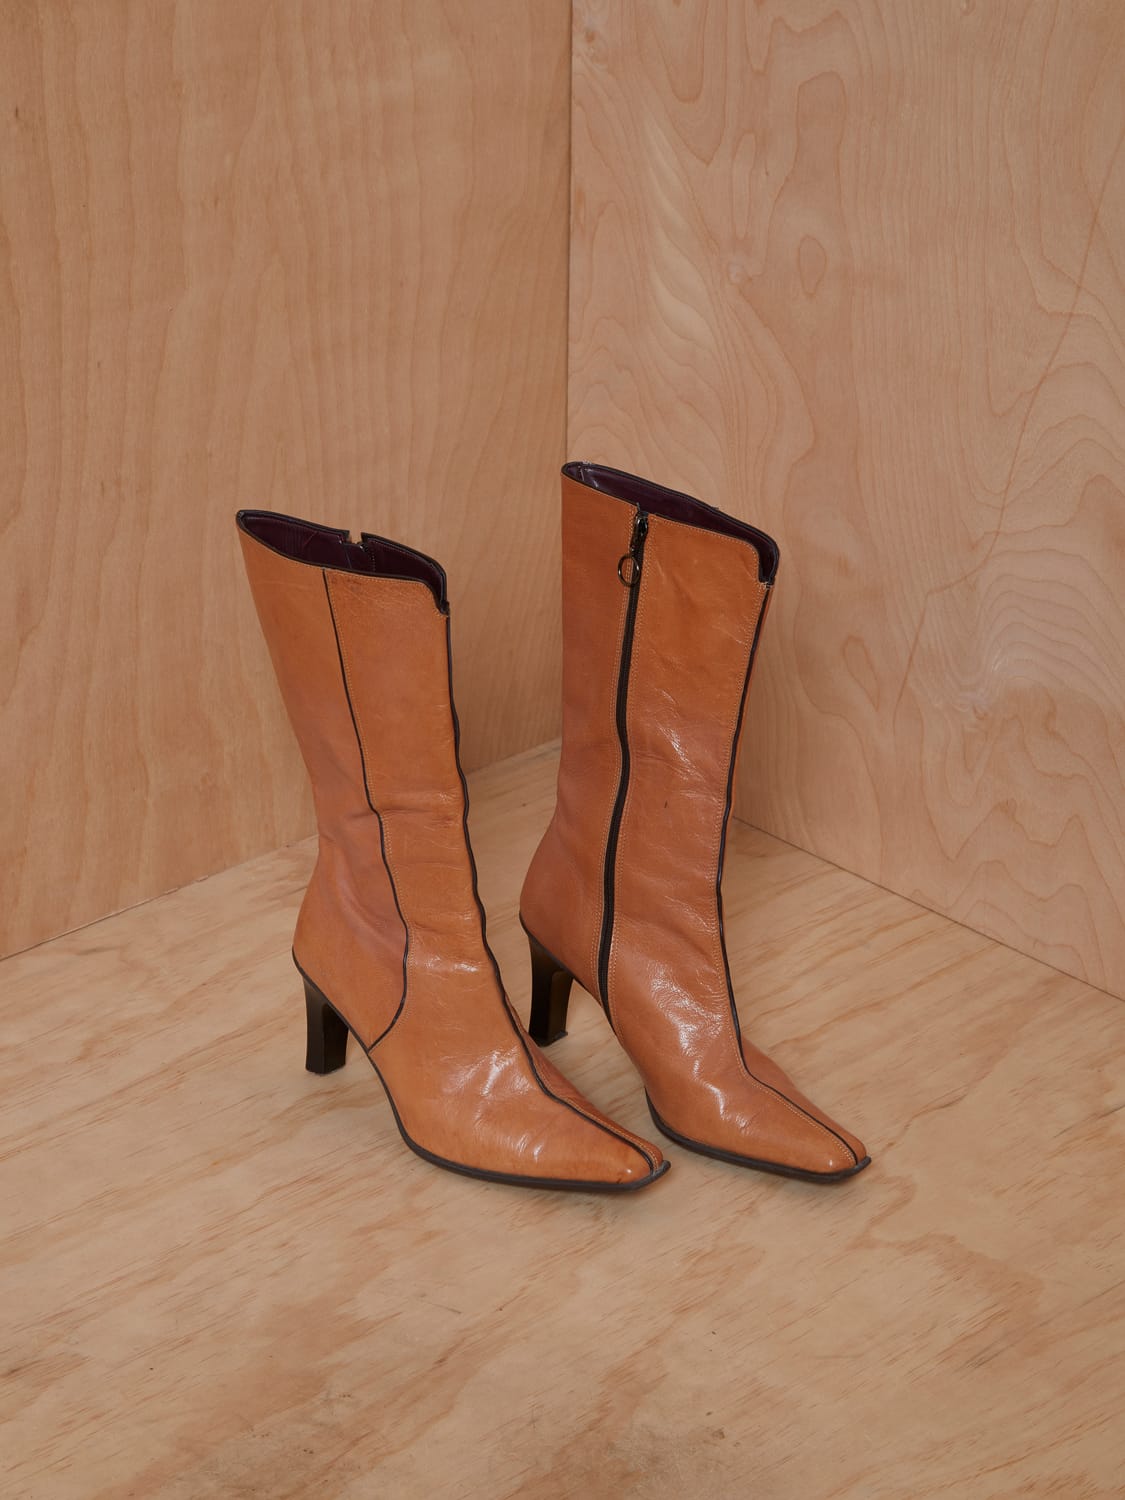 Vintage Leather Heeled Boots with Contrasting Trim